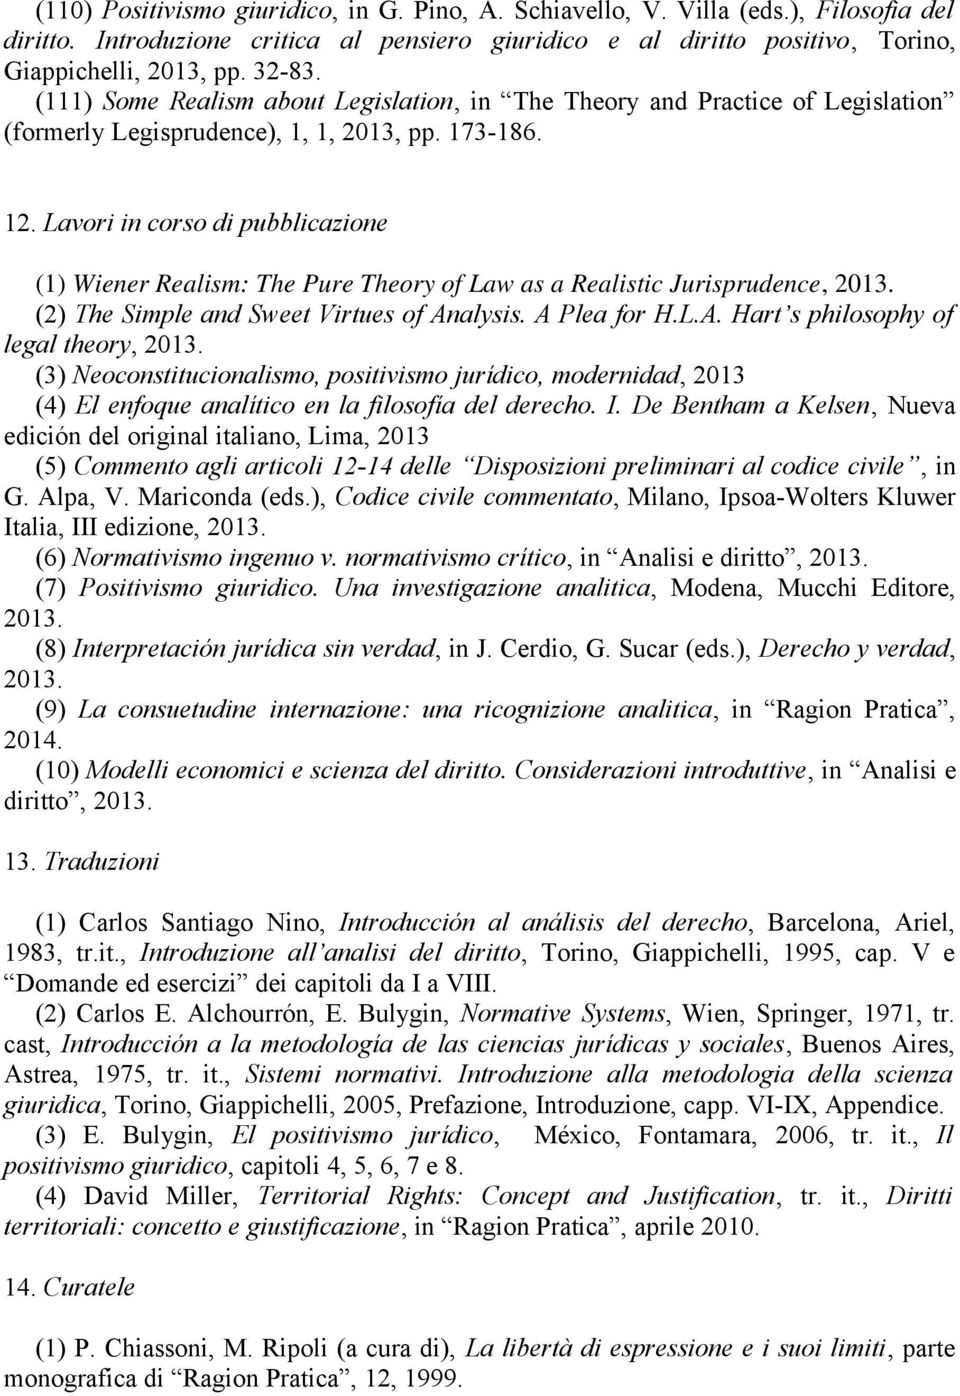 Lavori in corso di pubblicazione (1) Wiener Realism: The Pure Theory of Law as a Realistic Jurisprudence, 2013. (2) The Simple and Sweet Virtues of Analysis. A Plea for H.L.A. Hart s philosophy of legal theory, 2013.